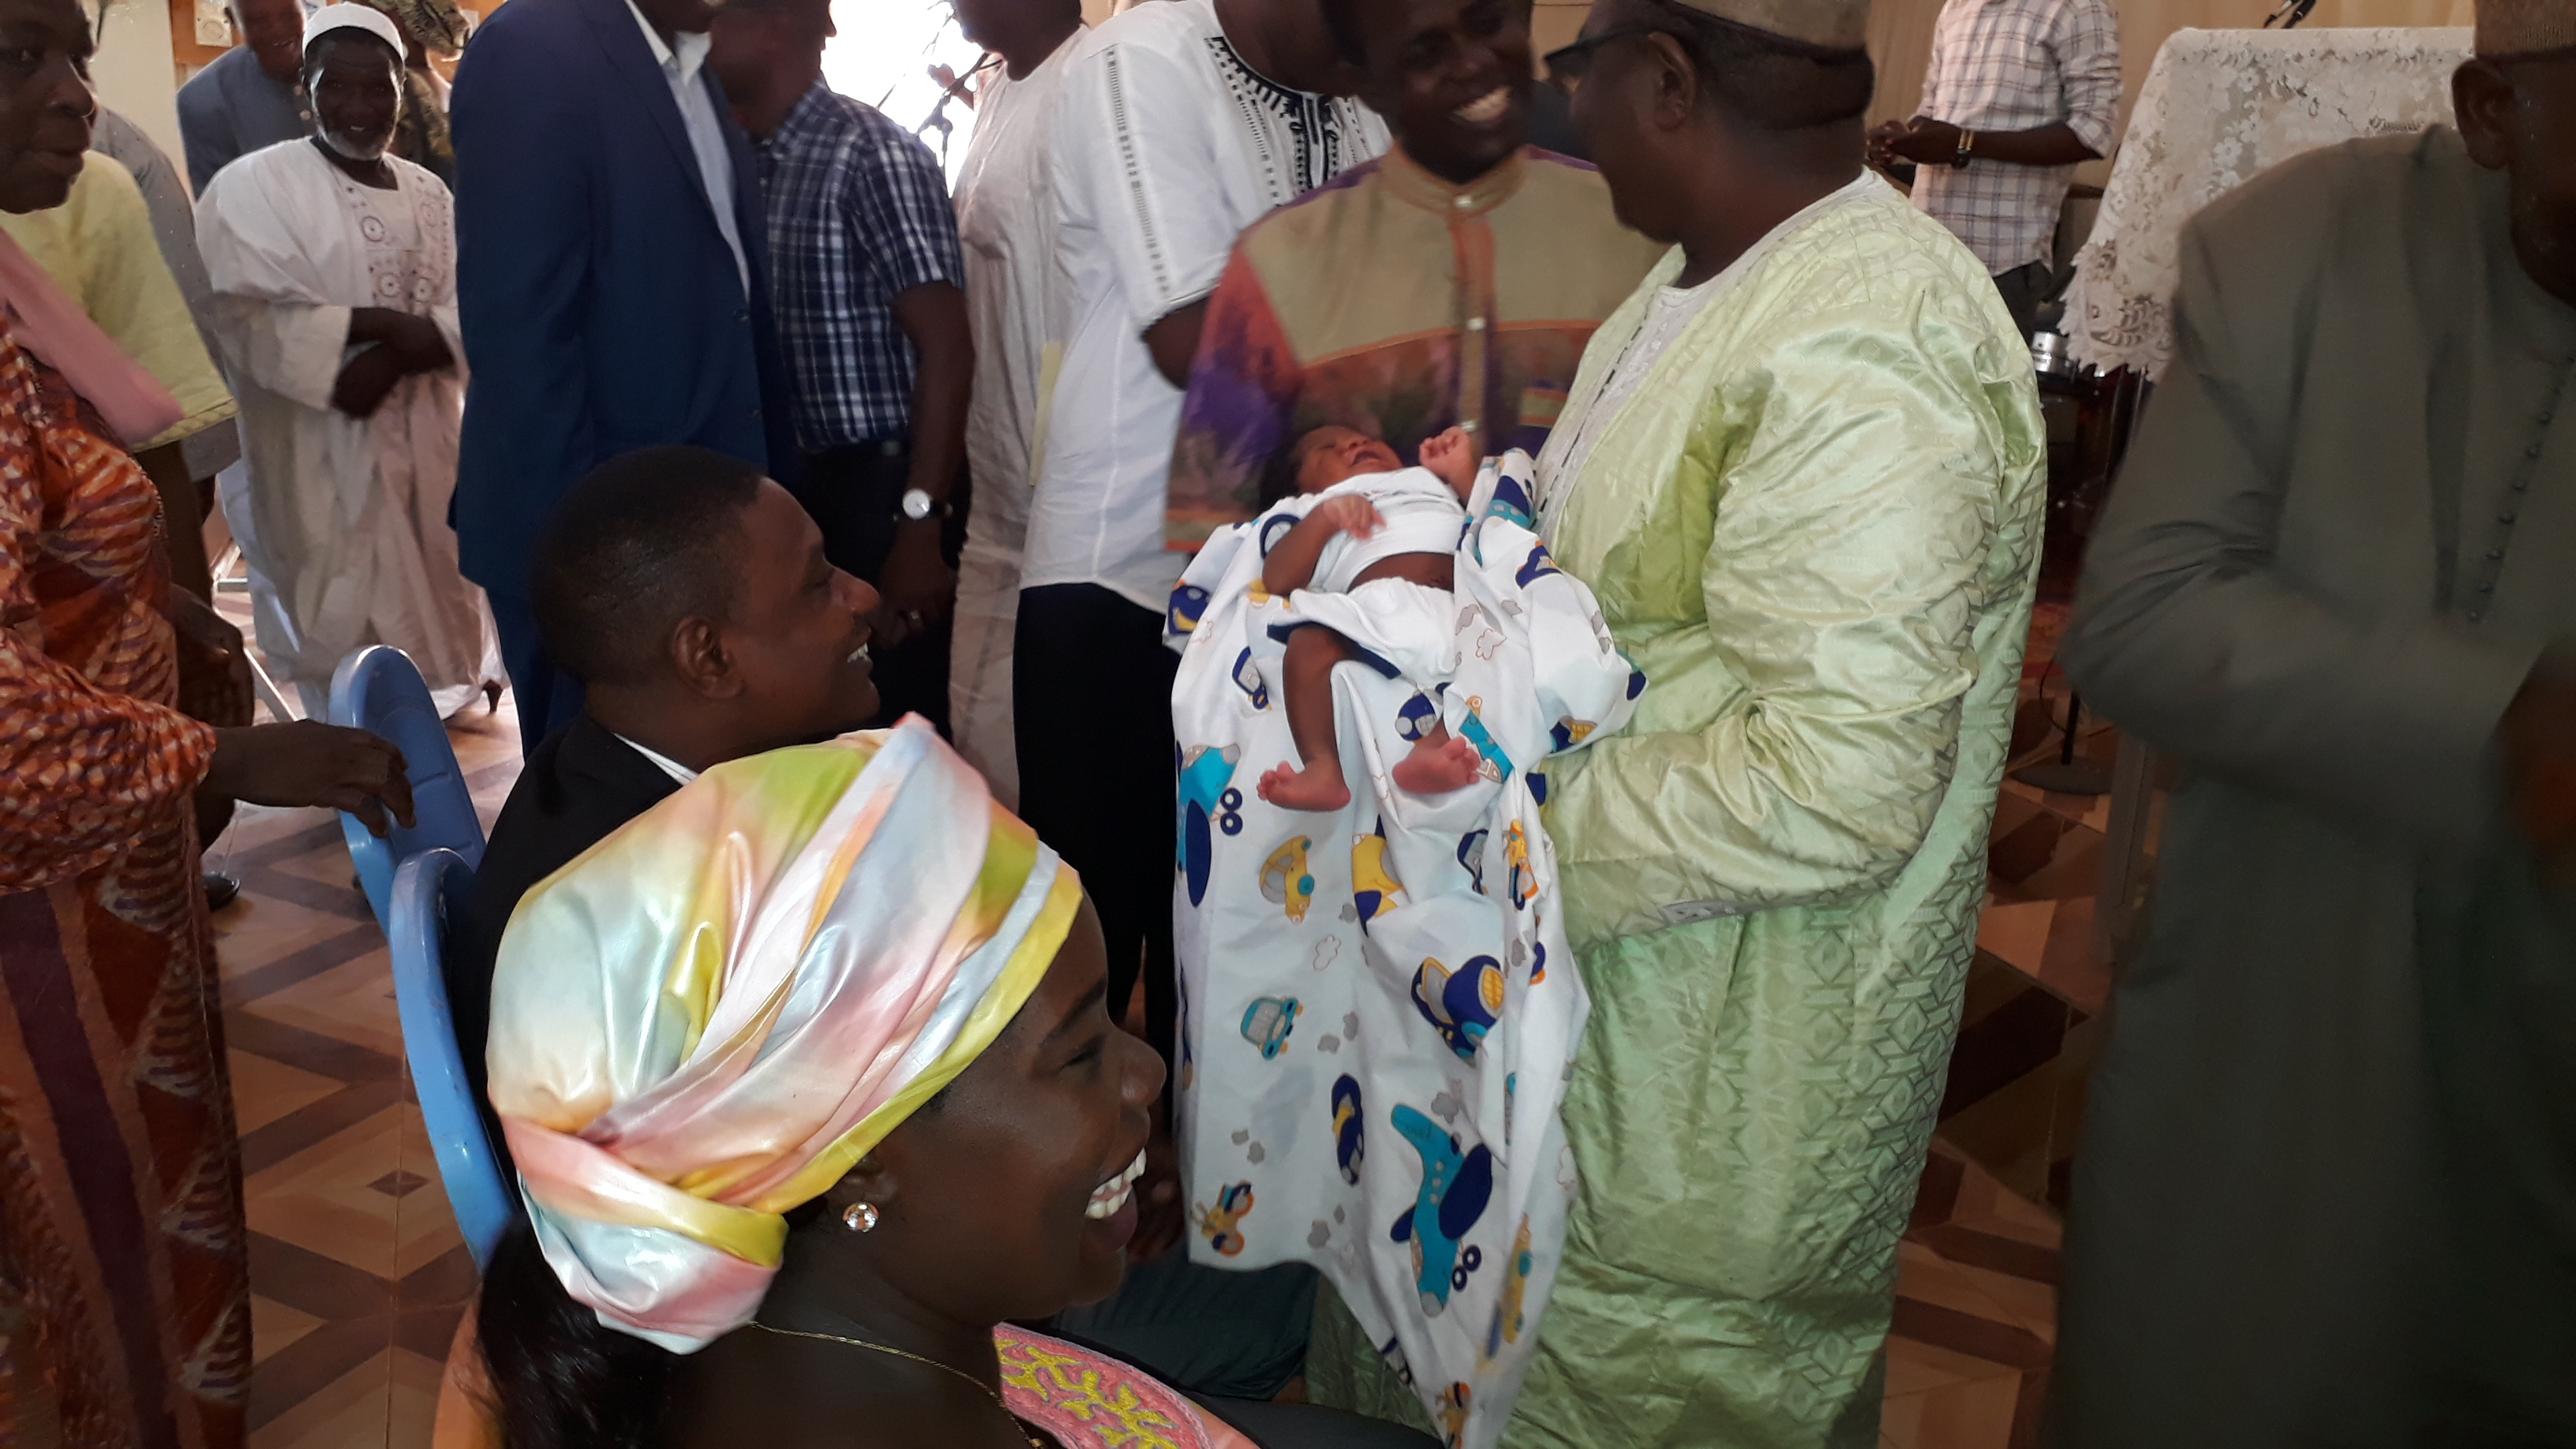 After Joshua’s naming ceremony, attendees congratulate the family.